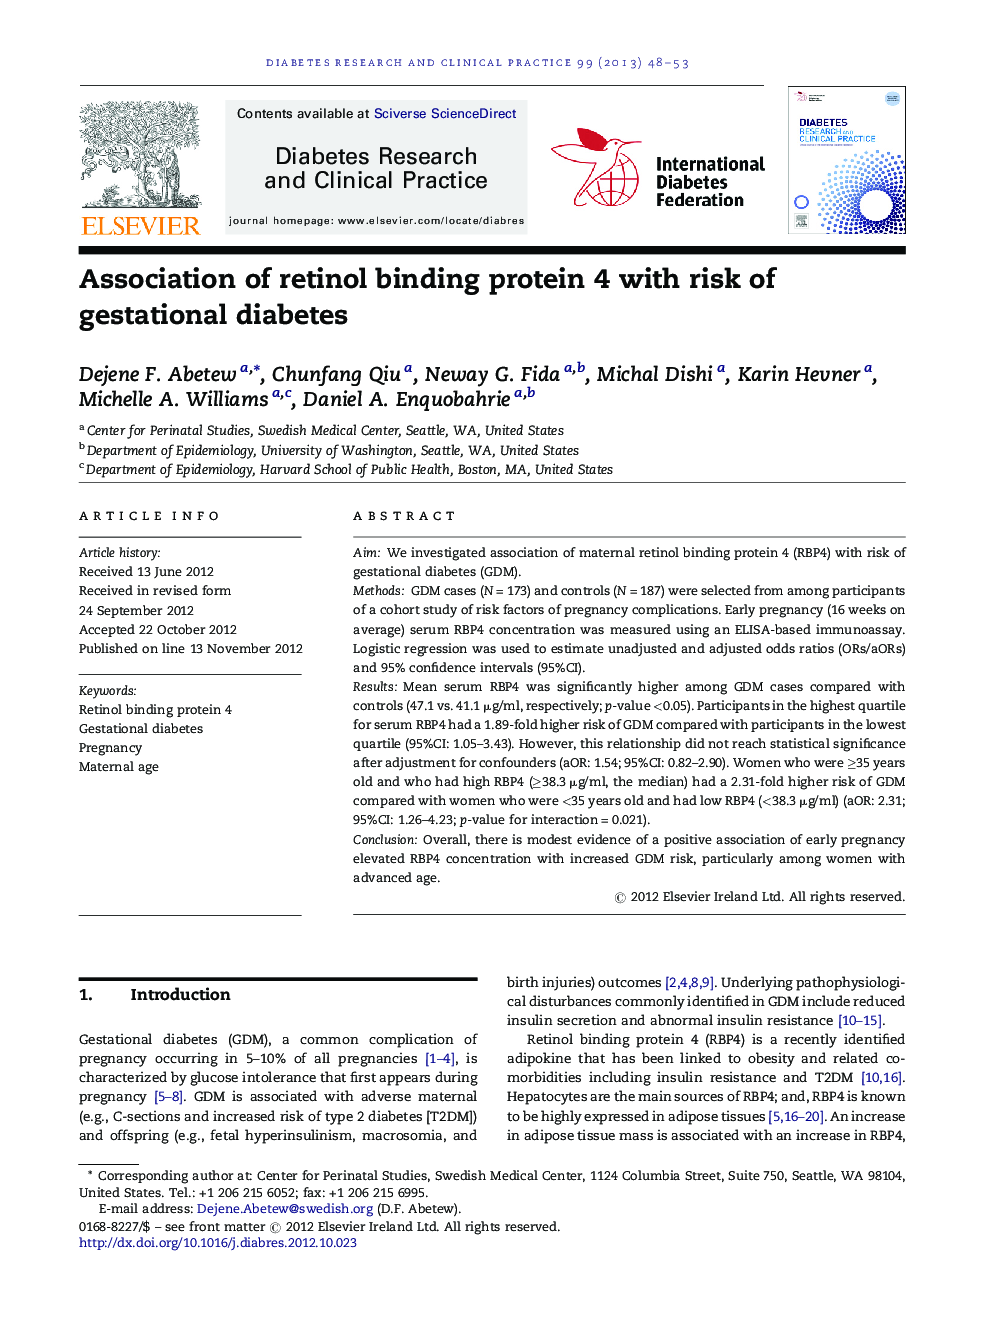 Association of retinol binding protein 4 with risk of gestational diabetes